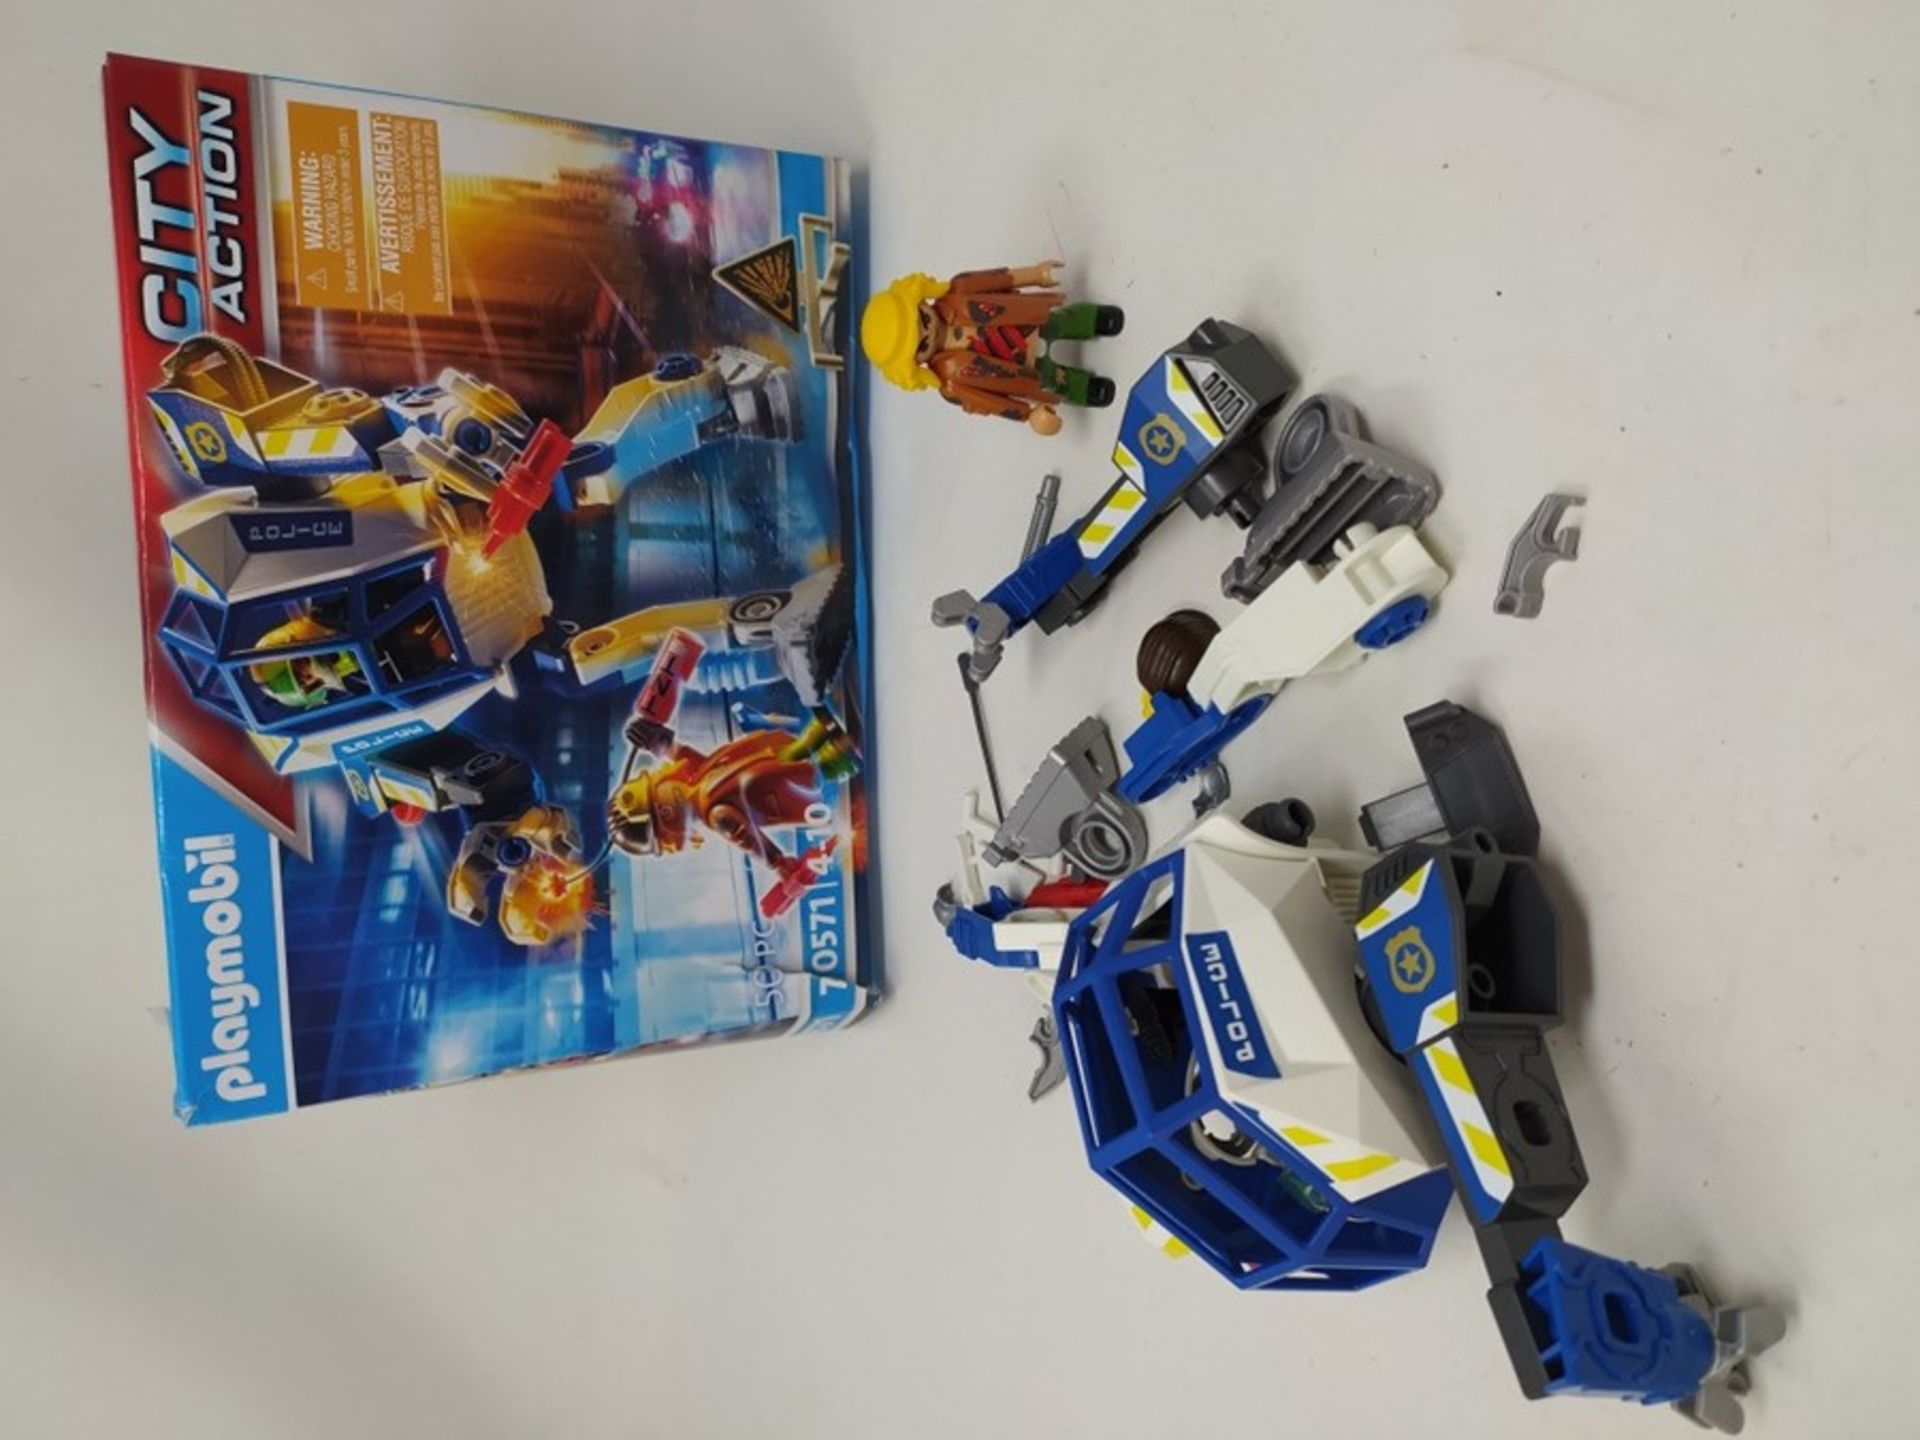 Playmobil 70571 City Action Police Special Operations Police Robot, for Children Ages - Image 3 of 3